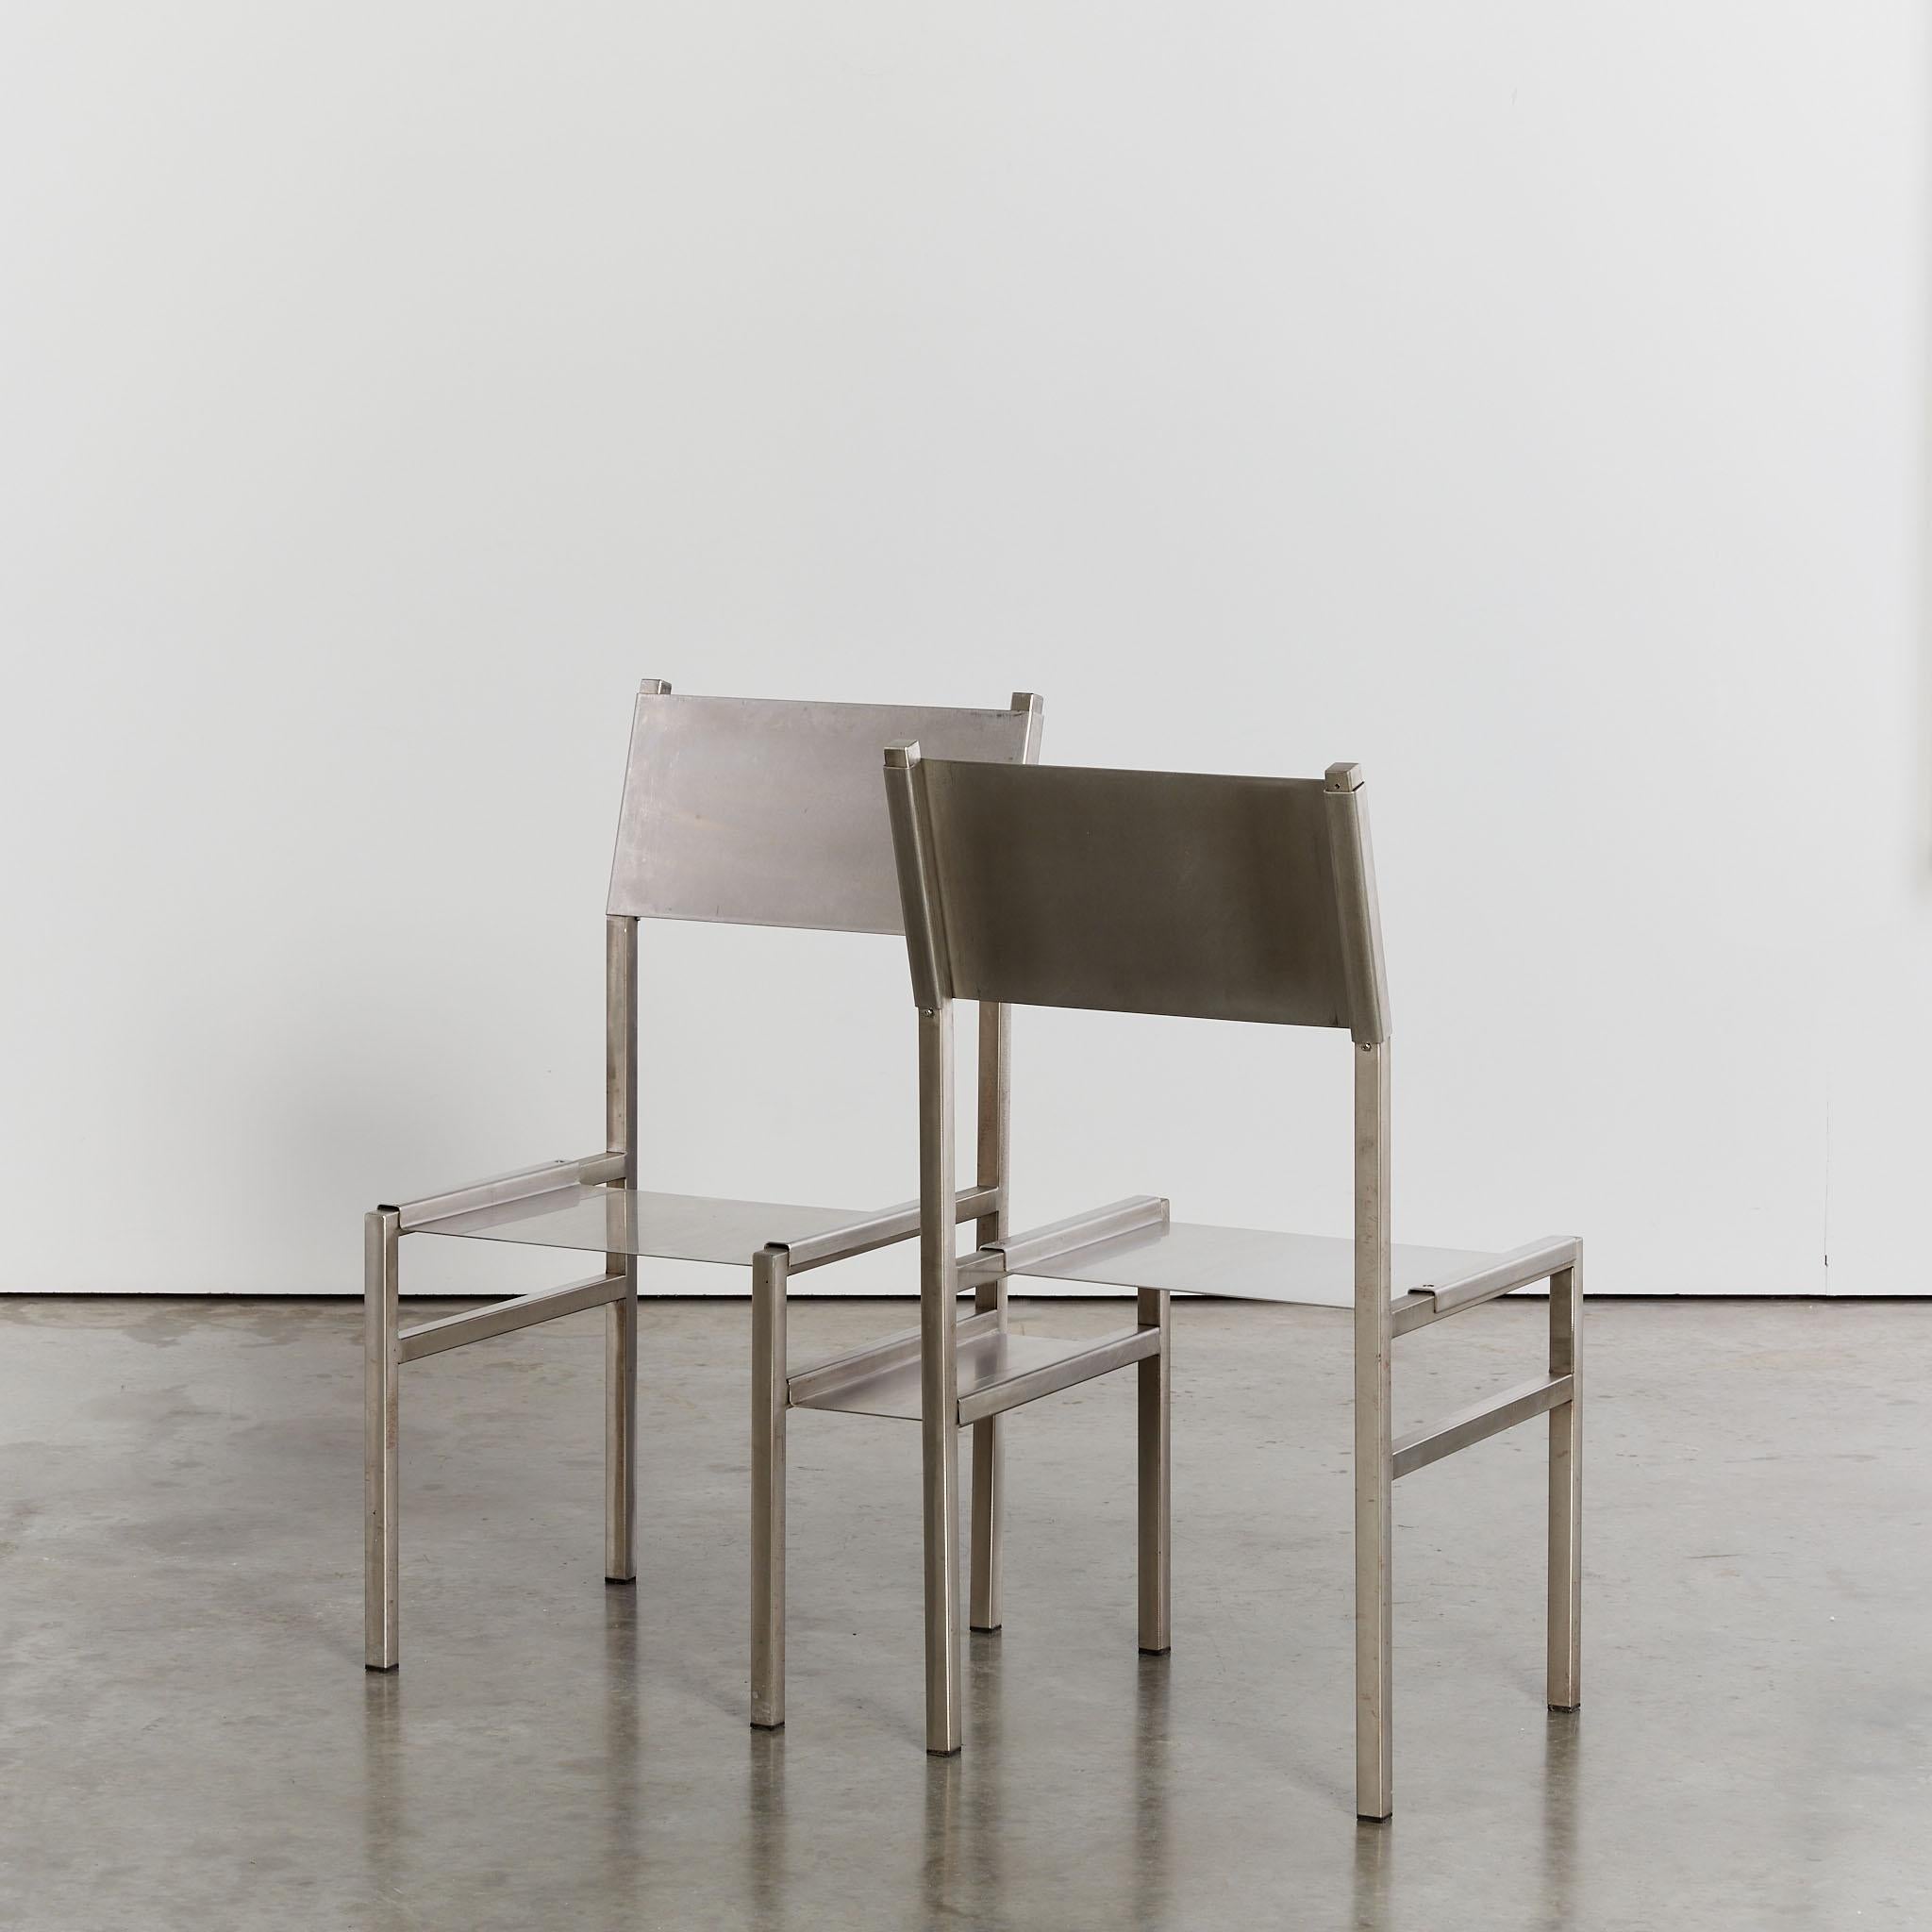 Stainless steel post modern Plugin loveseat by Christoph Siebrasse, edition of 6 For Sale 2